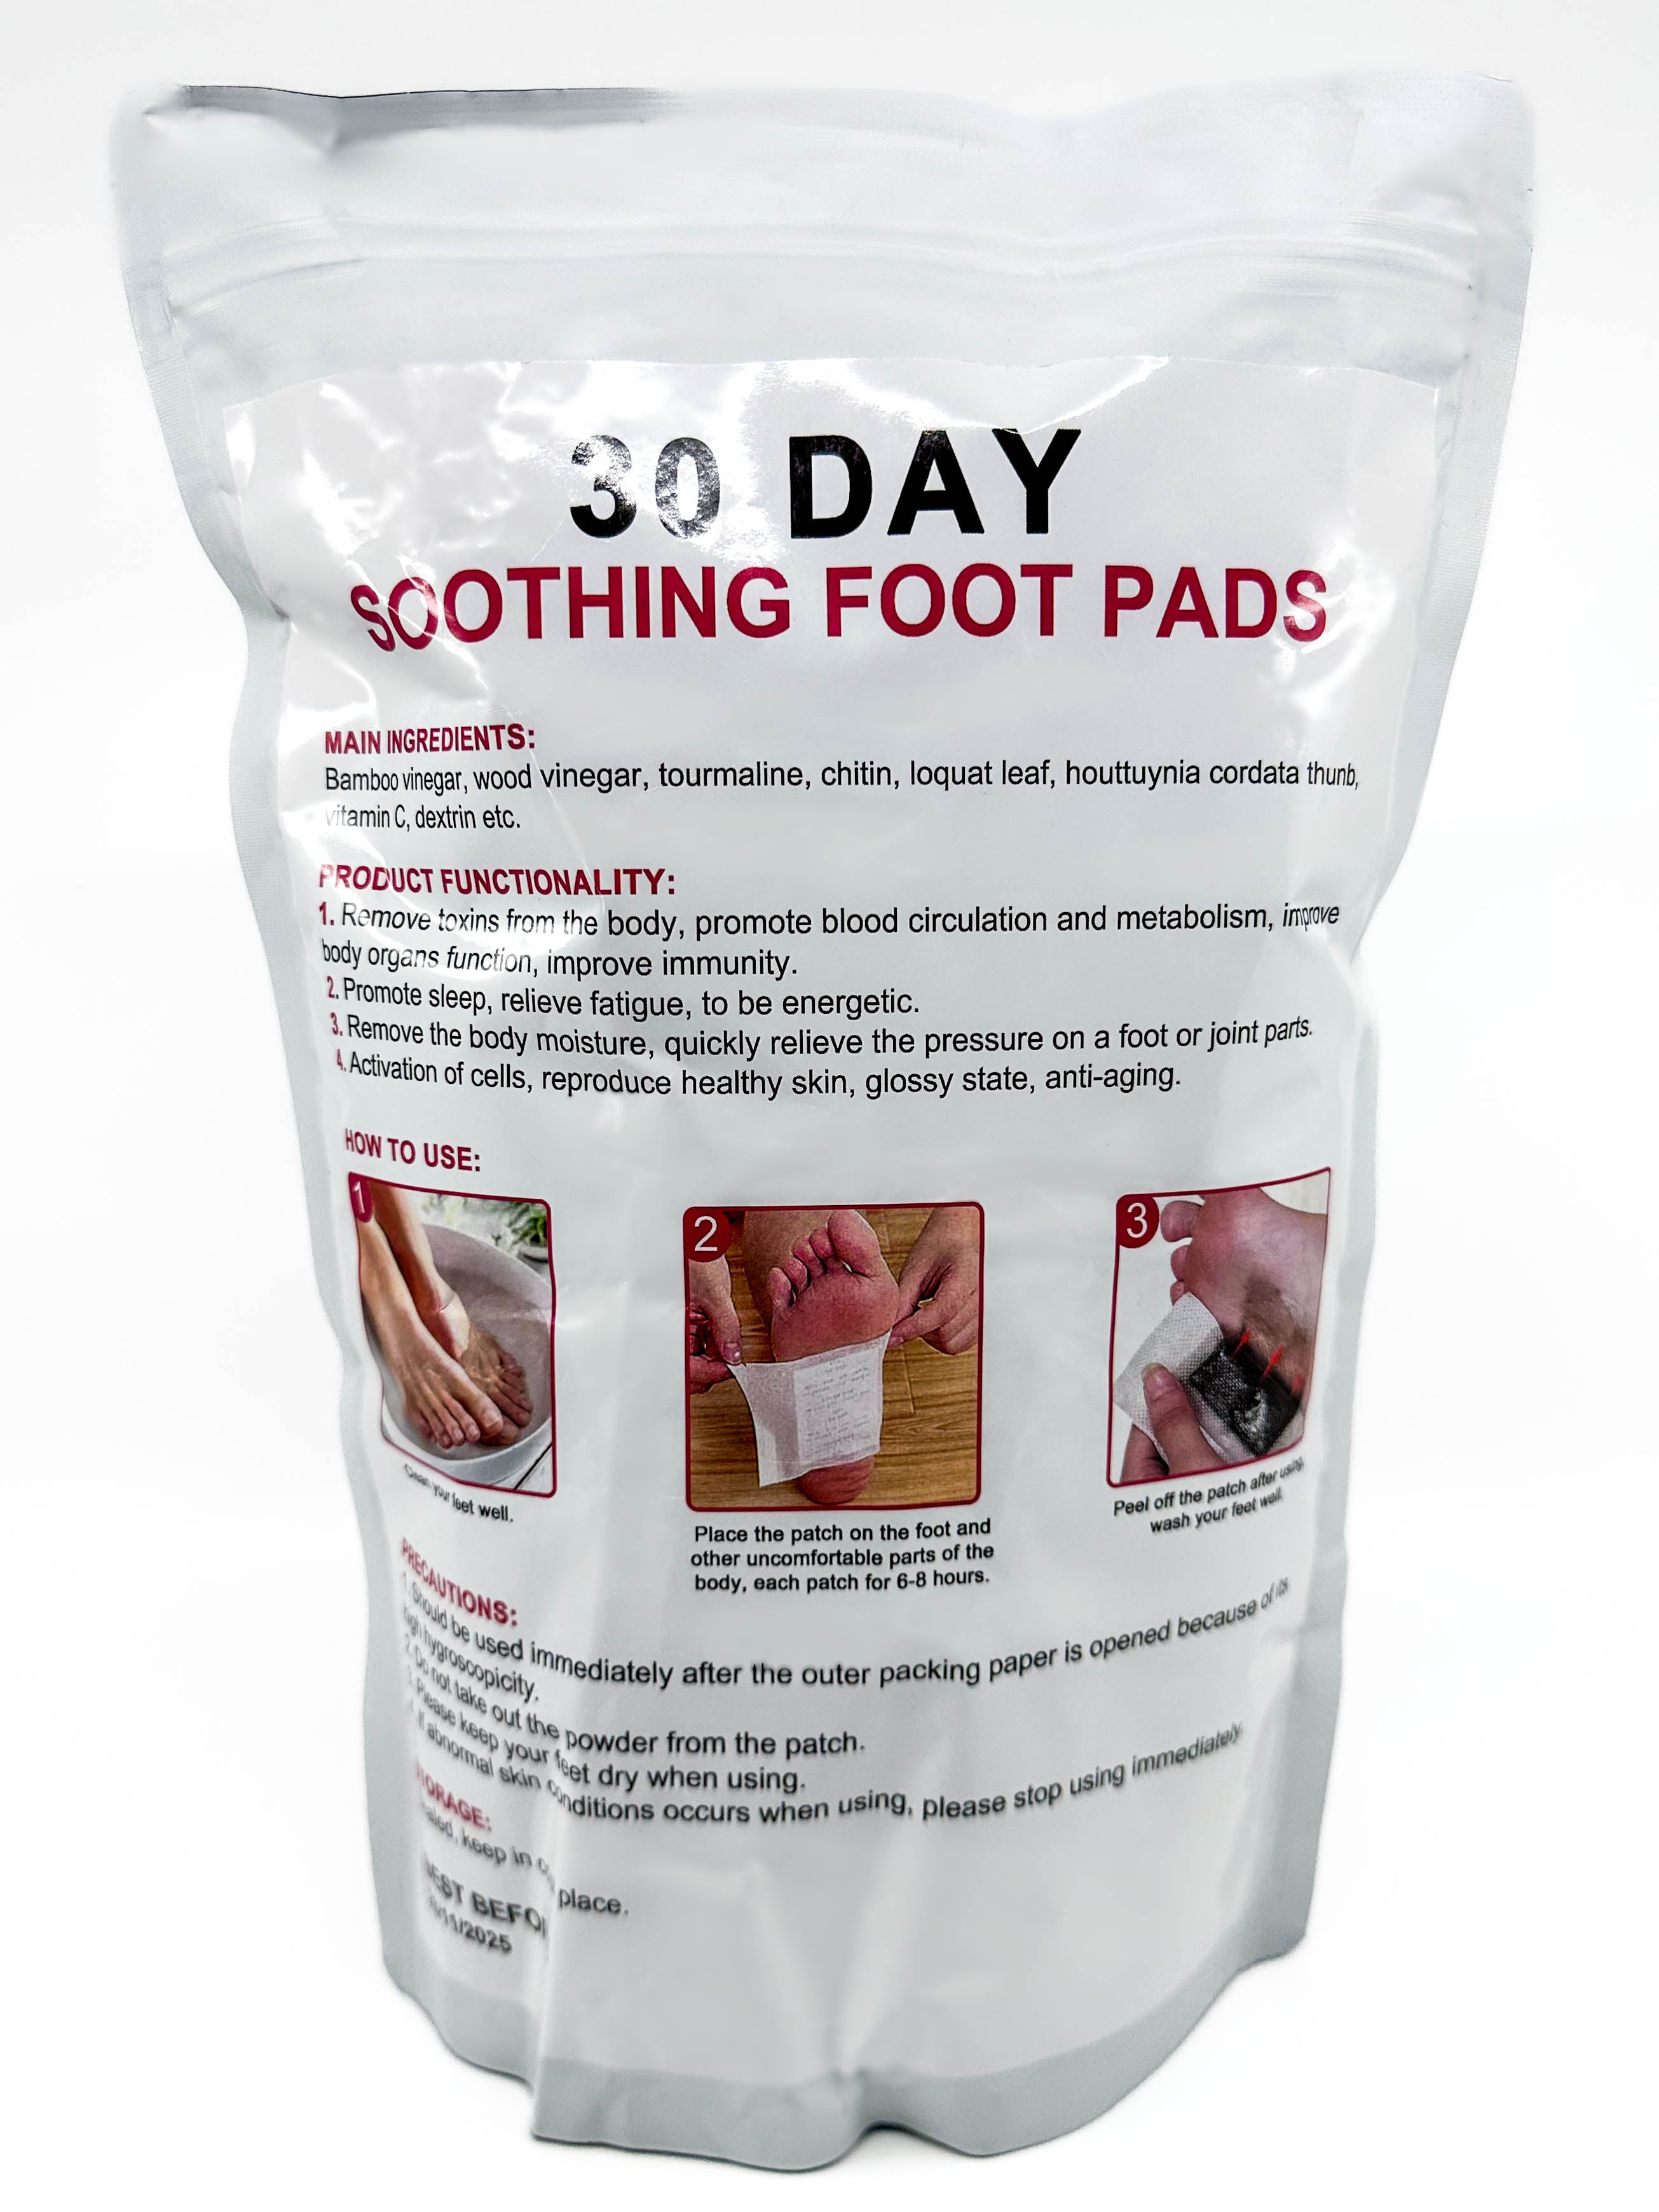 Soothing Foot Pads